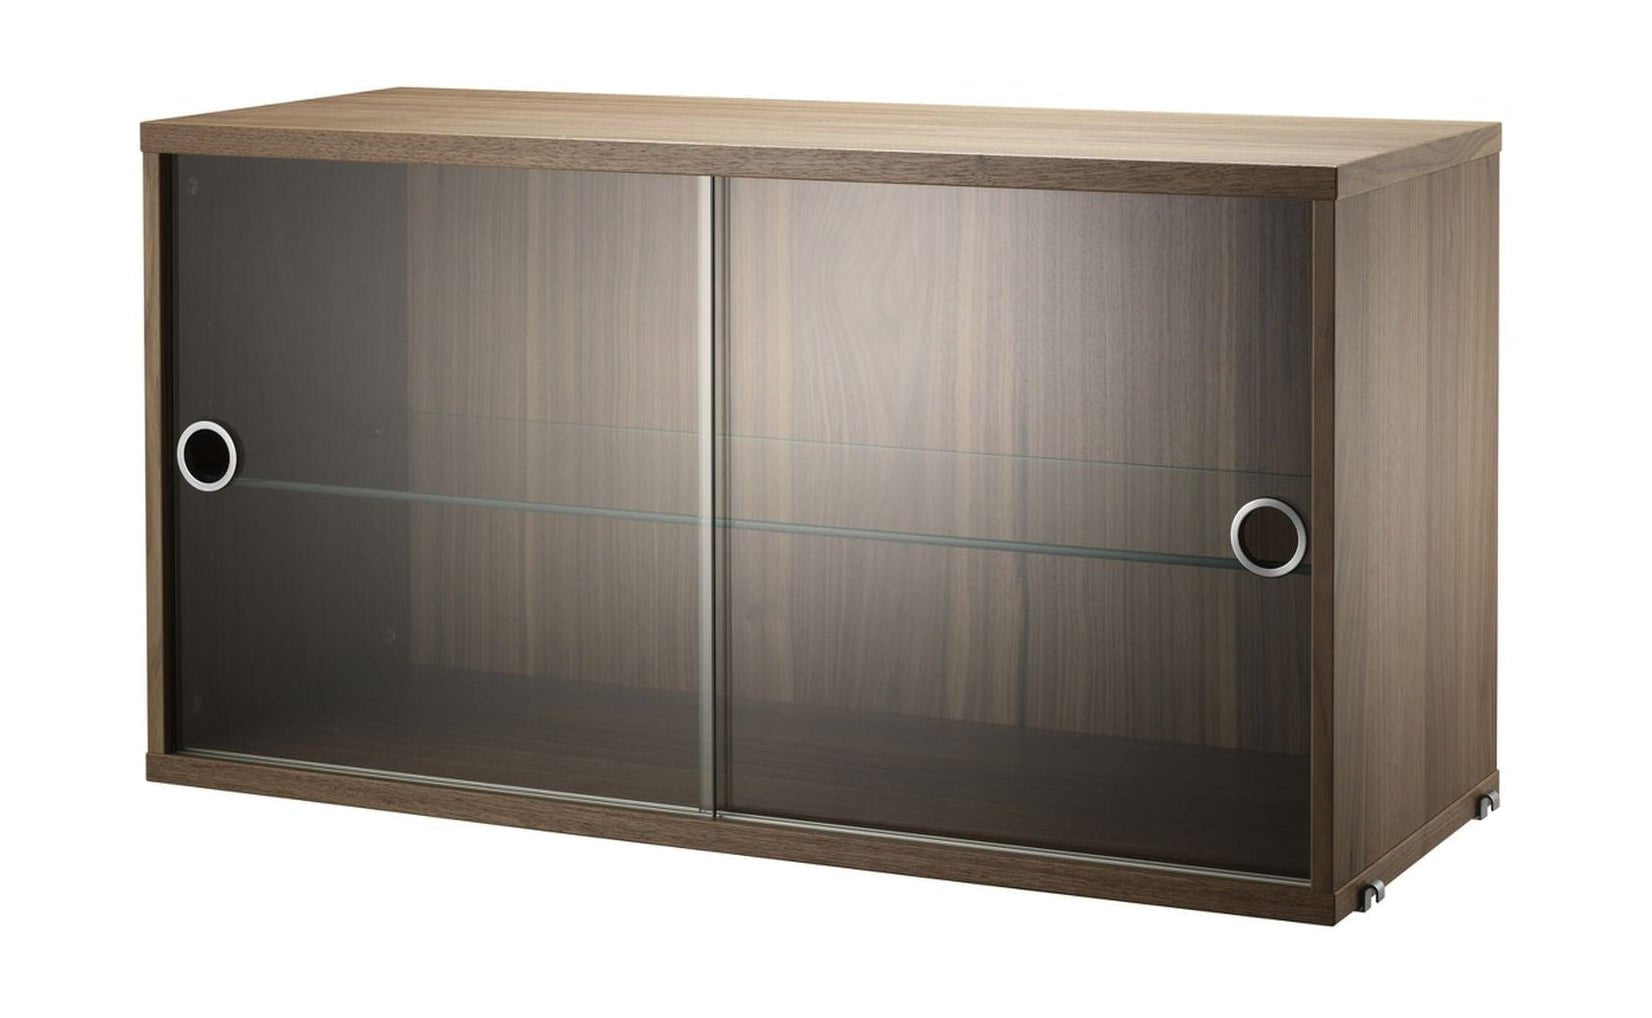 String Furniture String System Cabinet Element With Sliding Doors Made Of Glass, Walnut